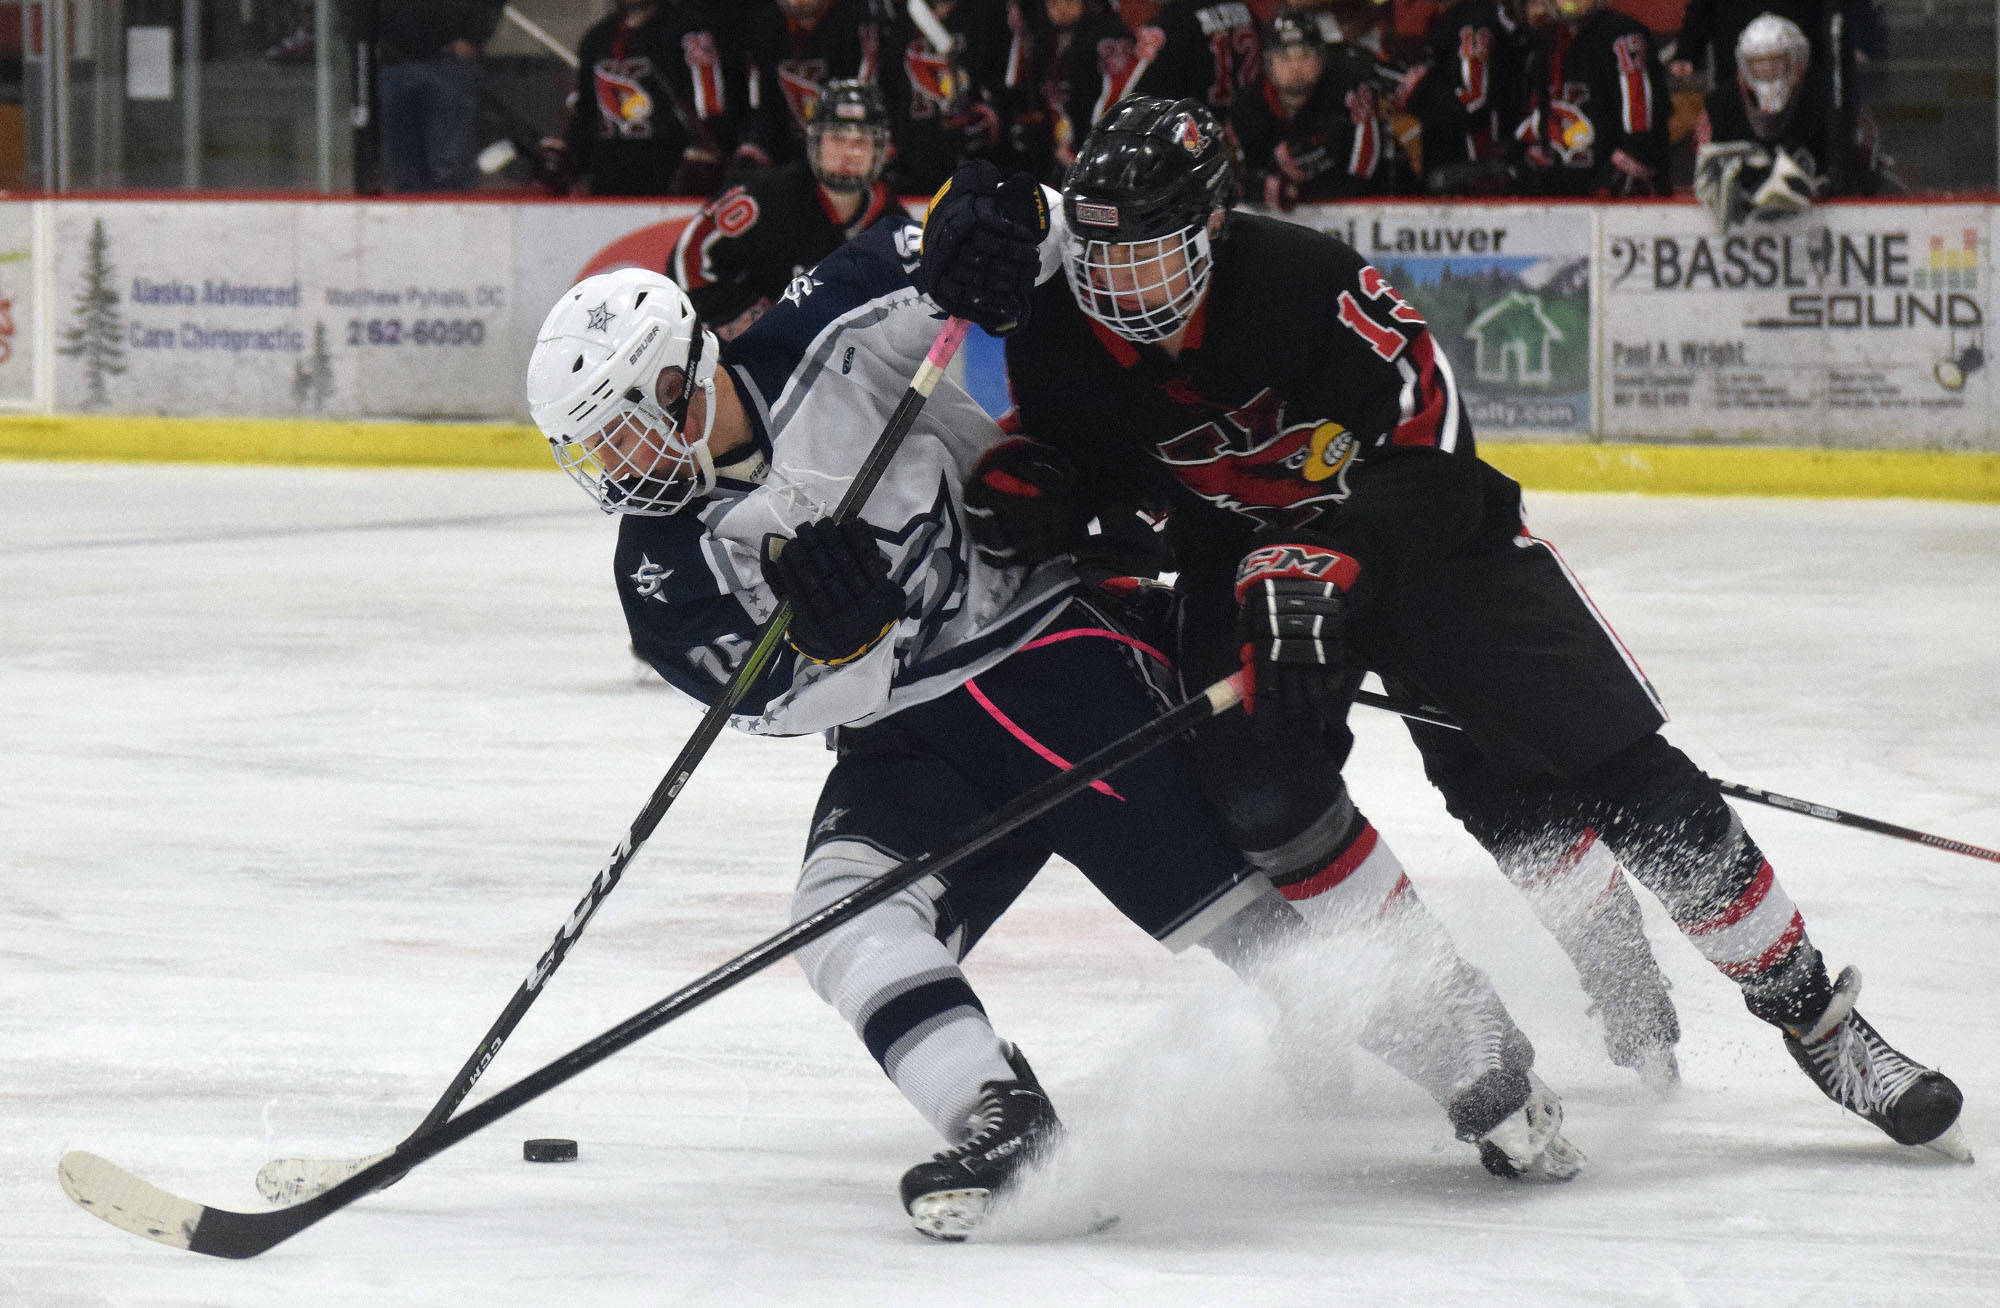 Kenai’s Aidan Milburn (right) and Soldotna’s Dylan Walton fight for the puck Wednesday night in a conference game at the Soldotna Regional Sports Complex. (Photo by Joey Klecka/Peninsula Clarion)